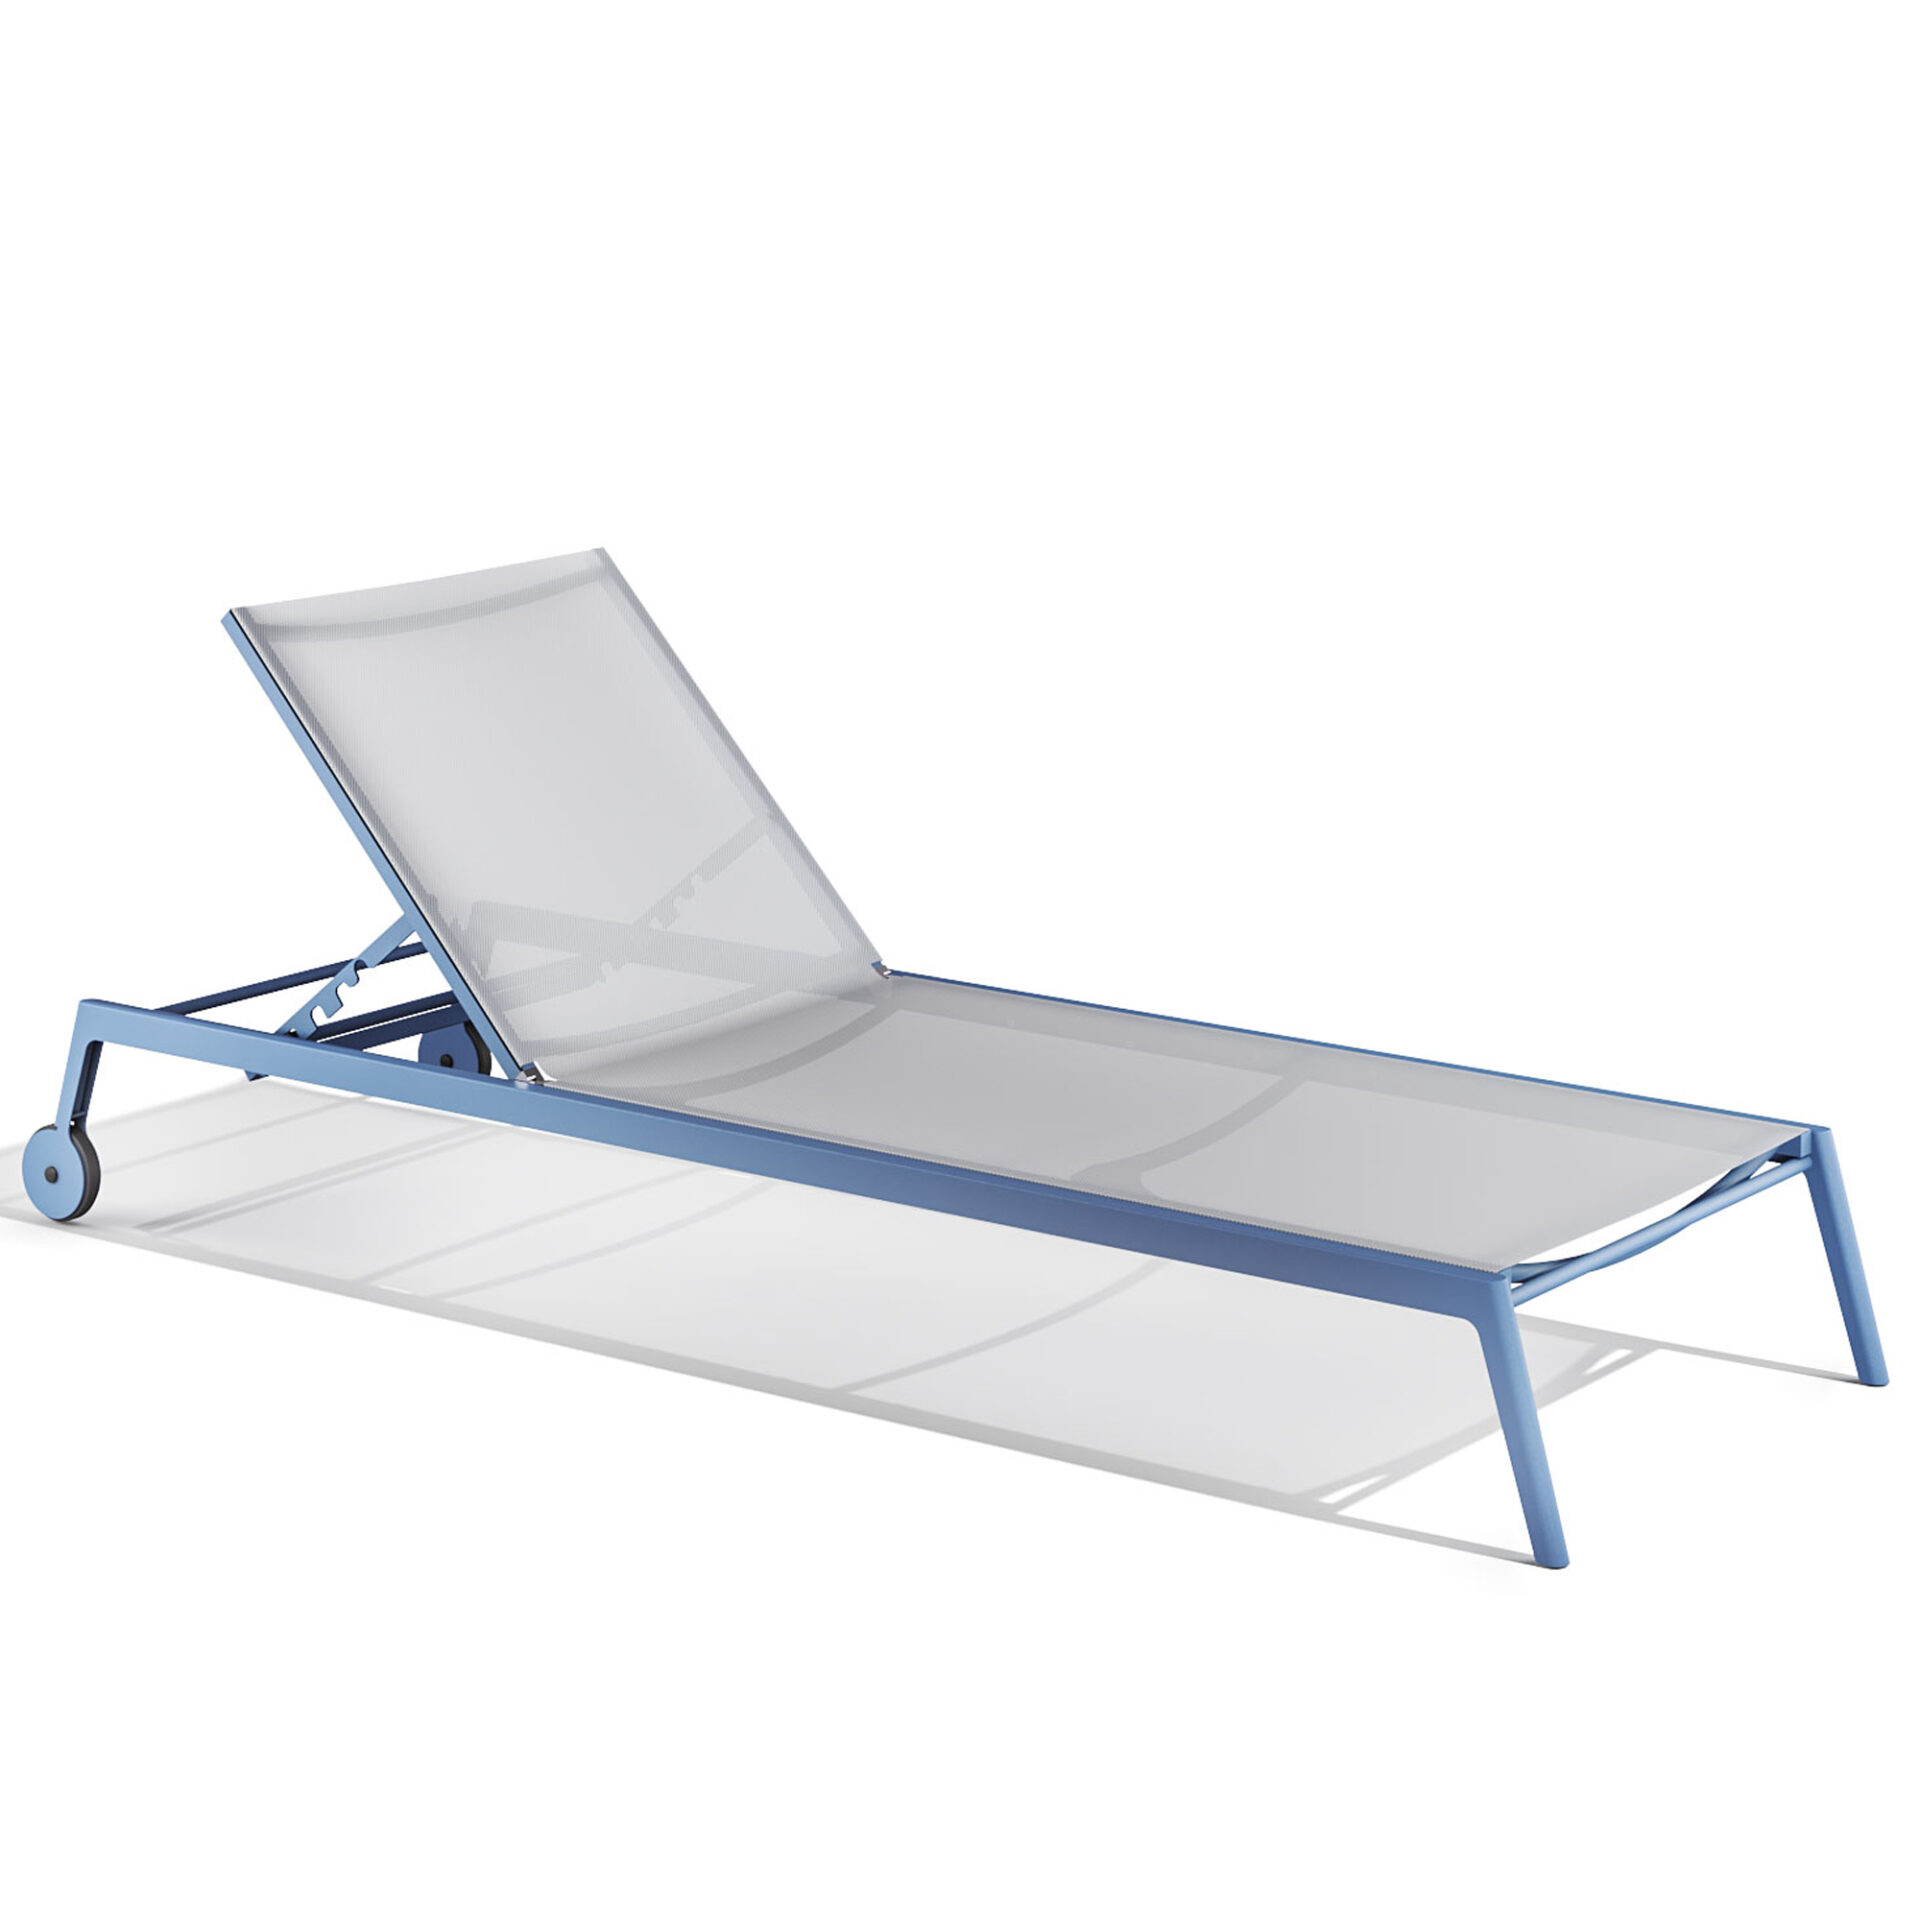 Sun lounger with wheels Gao